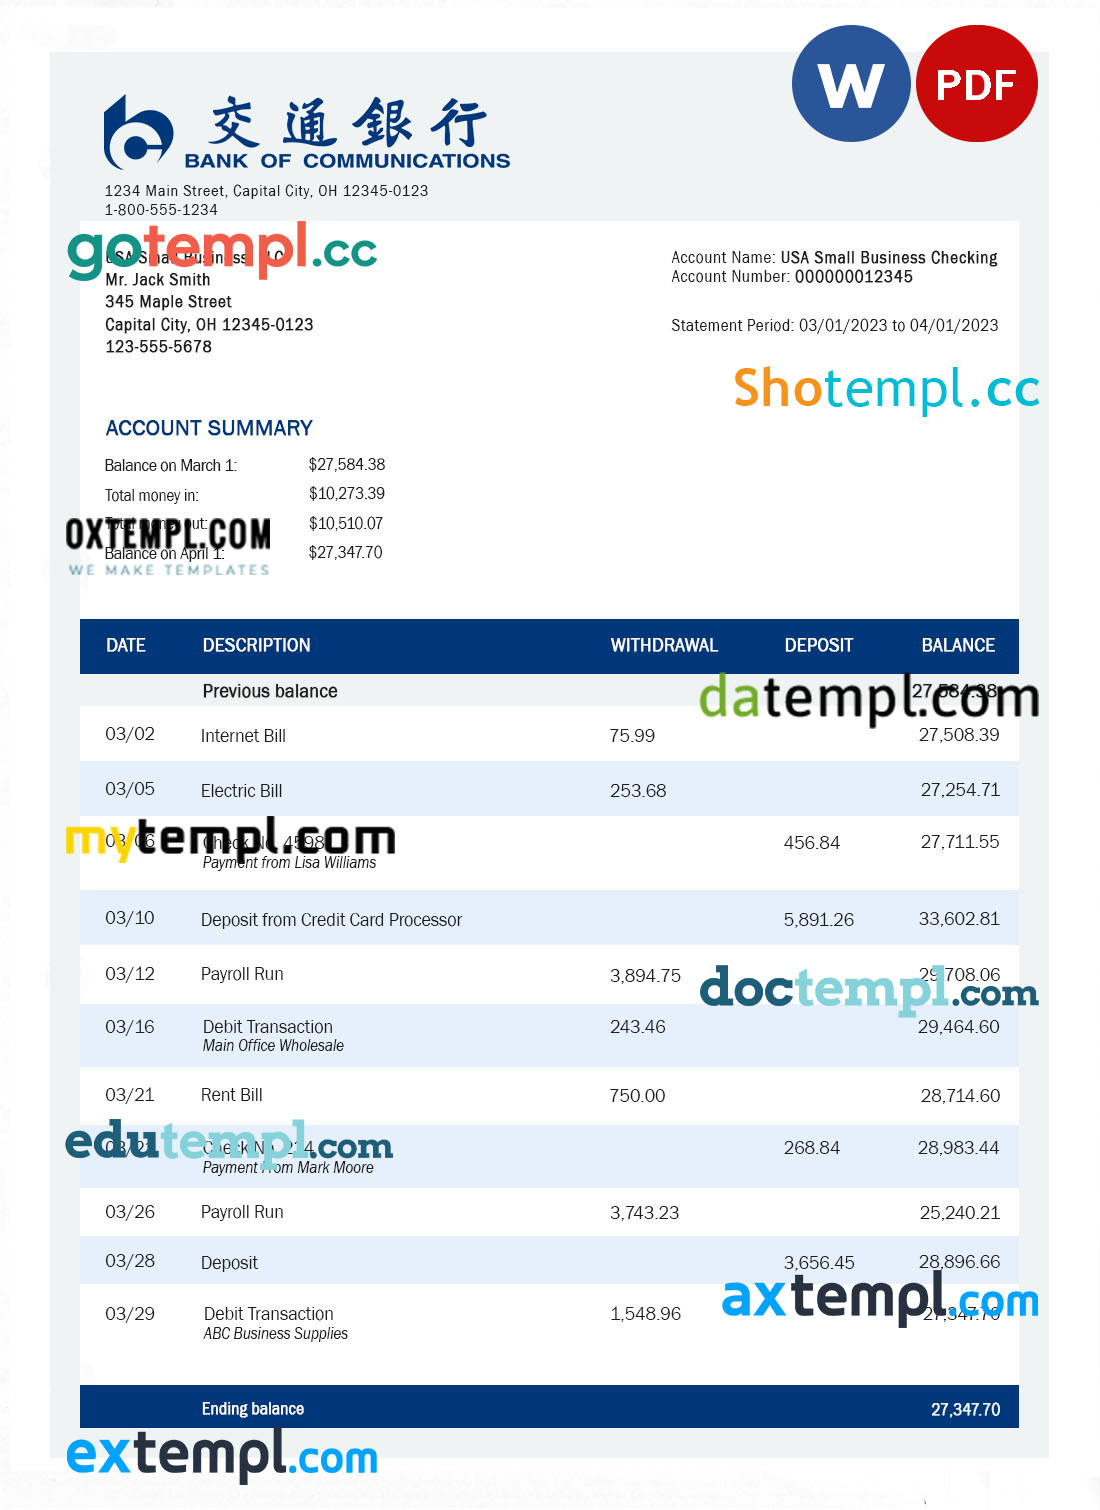 editable template, BANK of Communications bank enterprise account statement Word and PDF template